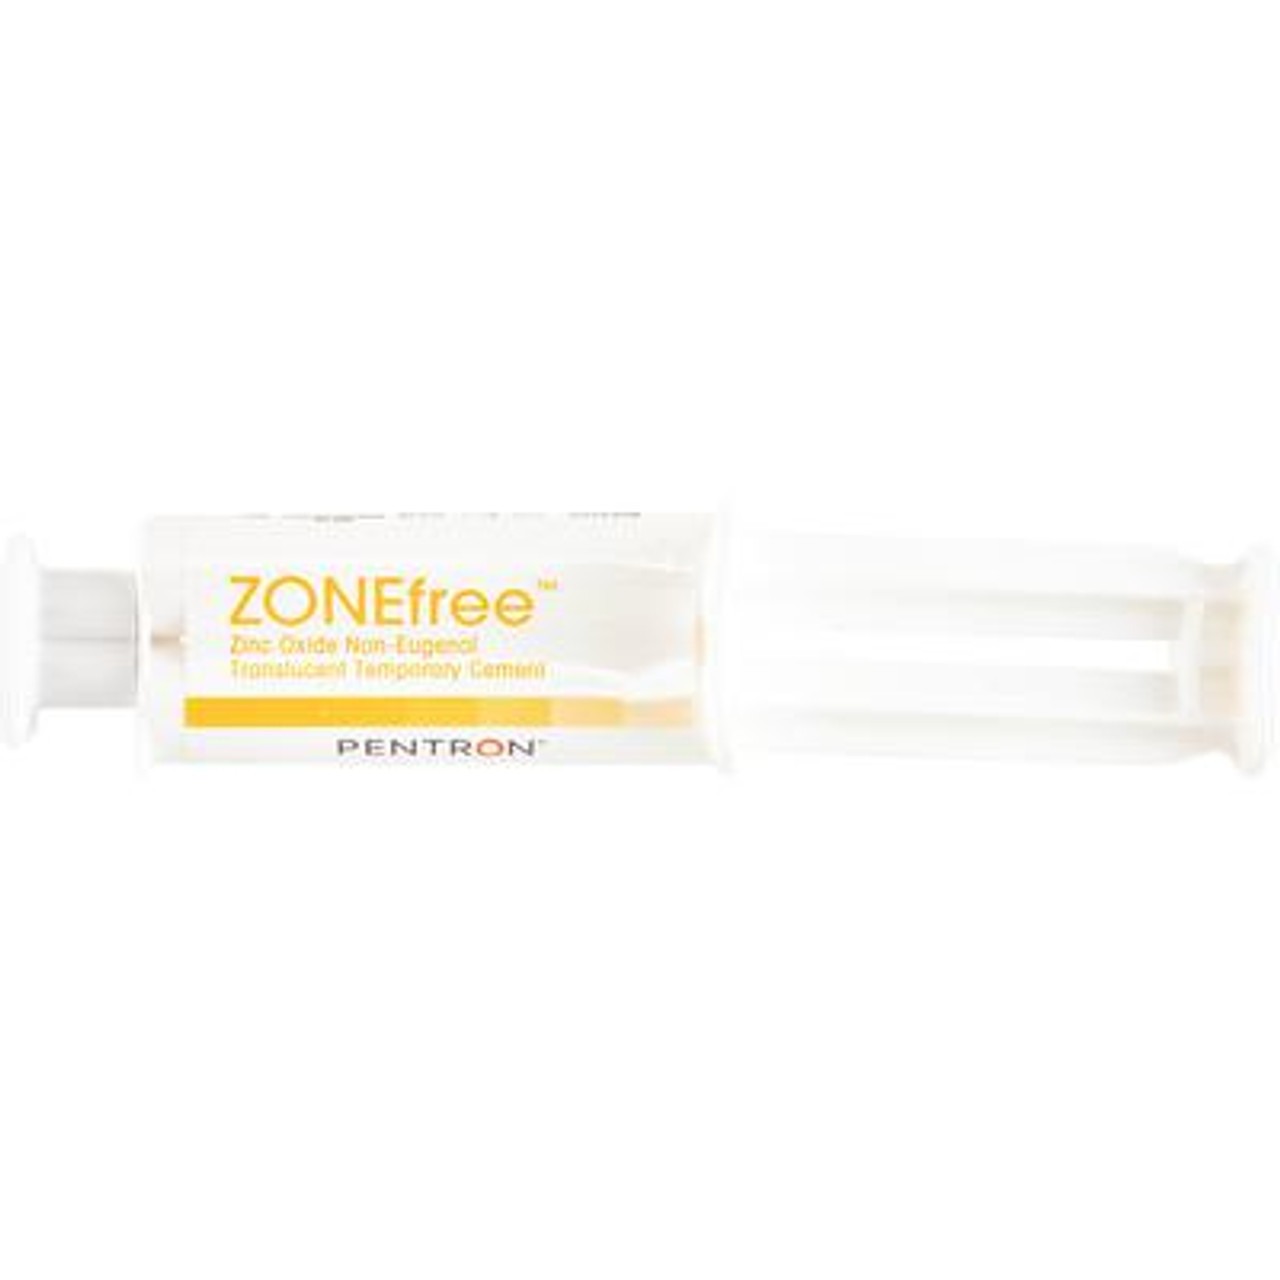 Pentron Zone Free Temporary Cement Hand-Mix Syringe 15g